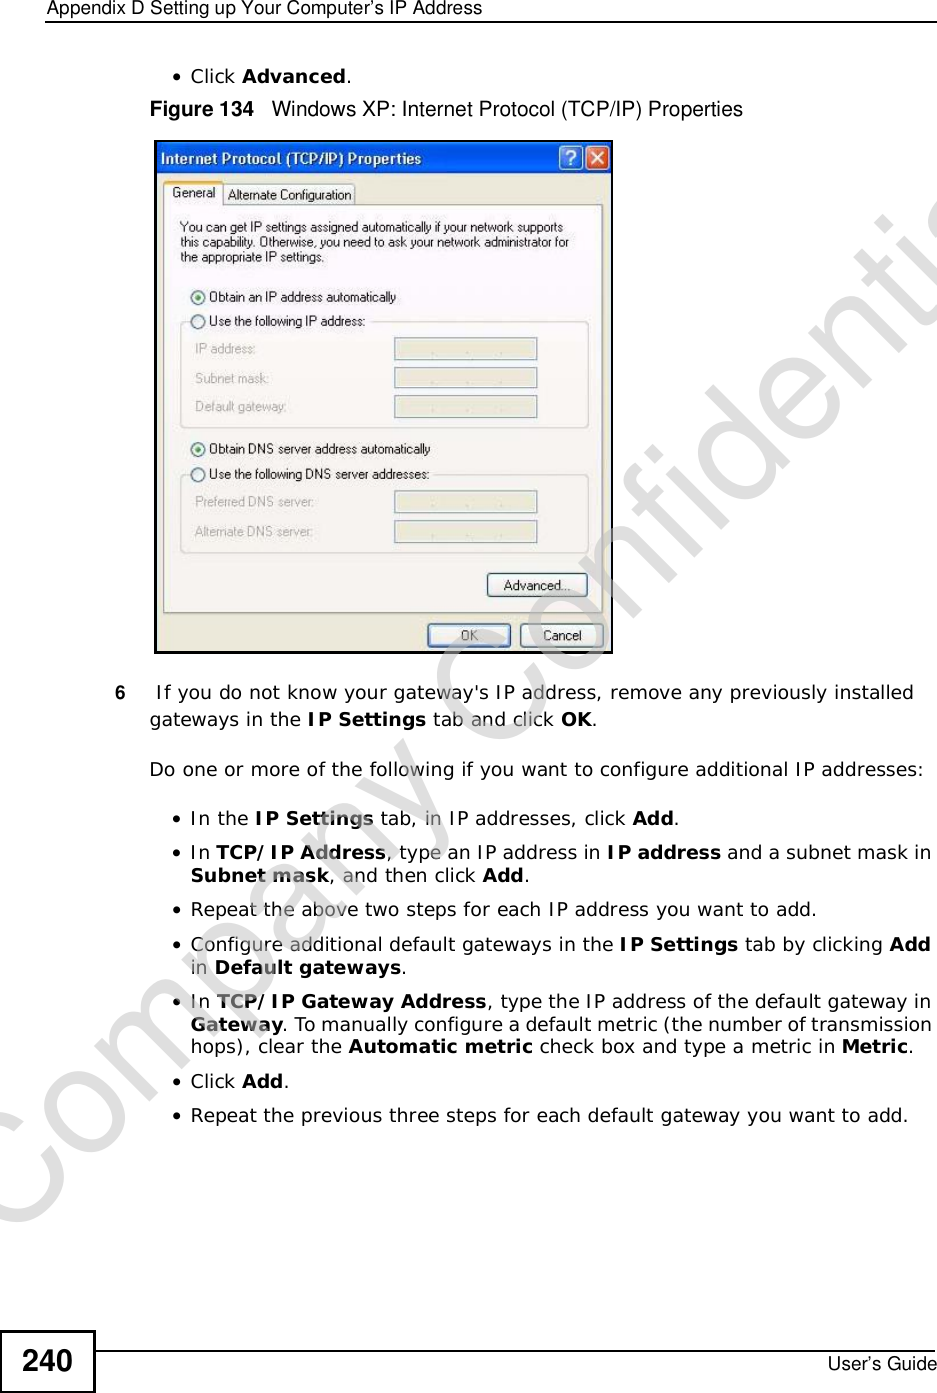 Appendix DSetting up Your Computer’s IP AddressUser’s Guide240•Click Advanced.Figure 134   Windows XP: Internet Protocol (TCP/IP) Properties6 If you do not know your gateway&apos;s IP address, remove any previously installed gateways in the IP Settings tab and click OK.Do one or more of the following if you want to configure additional IP addresses:•In the IP Settings tab, in IP addresses, click Add.•In TCP/IP Address, type an IP address in IP address and a subnet mask in Subnet mask, and then click Add.•Repeat the above two steps for each IP address you want to add.•Configure additional default gateways in the IP Settings tab by clicking Addin Default gateways.•In TCP/IP Gateway Address, type the IP address of the default gateway in Gateway. To manually configure a default metric (the number of transmission hops), clear the Automatic metric check box and type a metric in Metric.•Click Add.•Repeat the previous three steps for each default gateway you want to add.Company Confidential